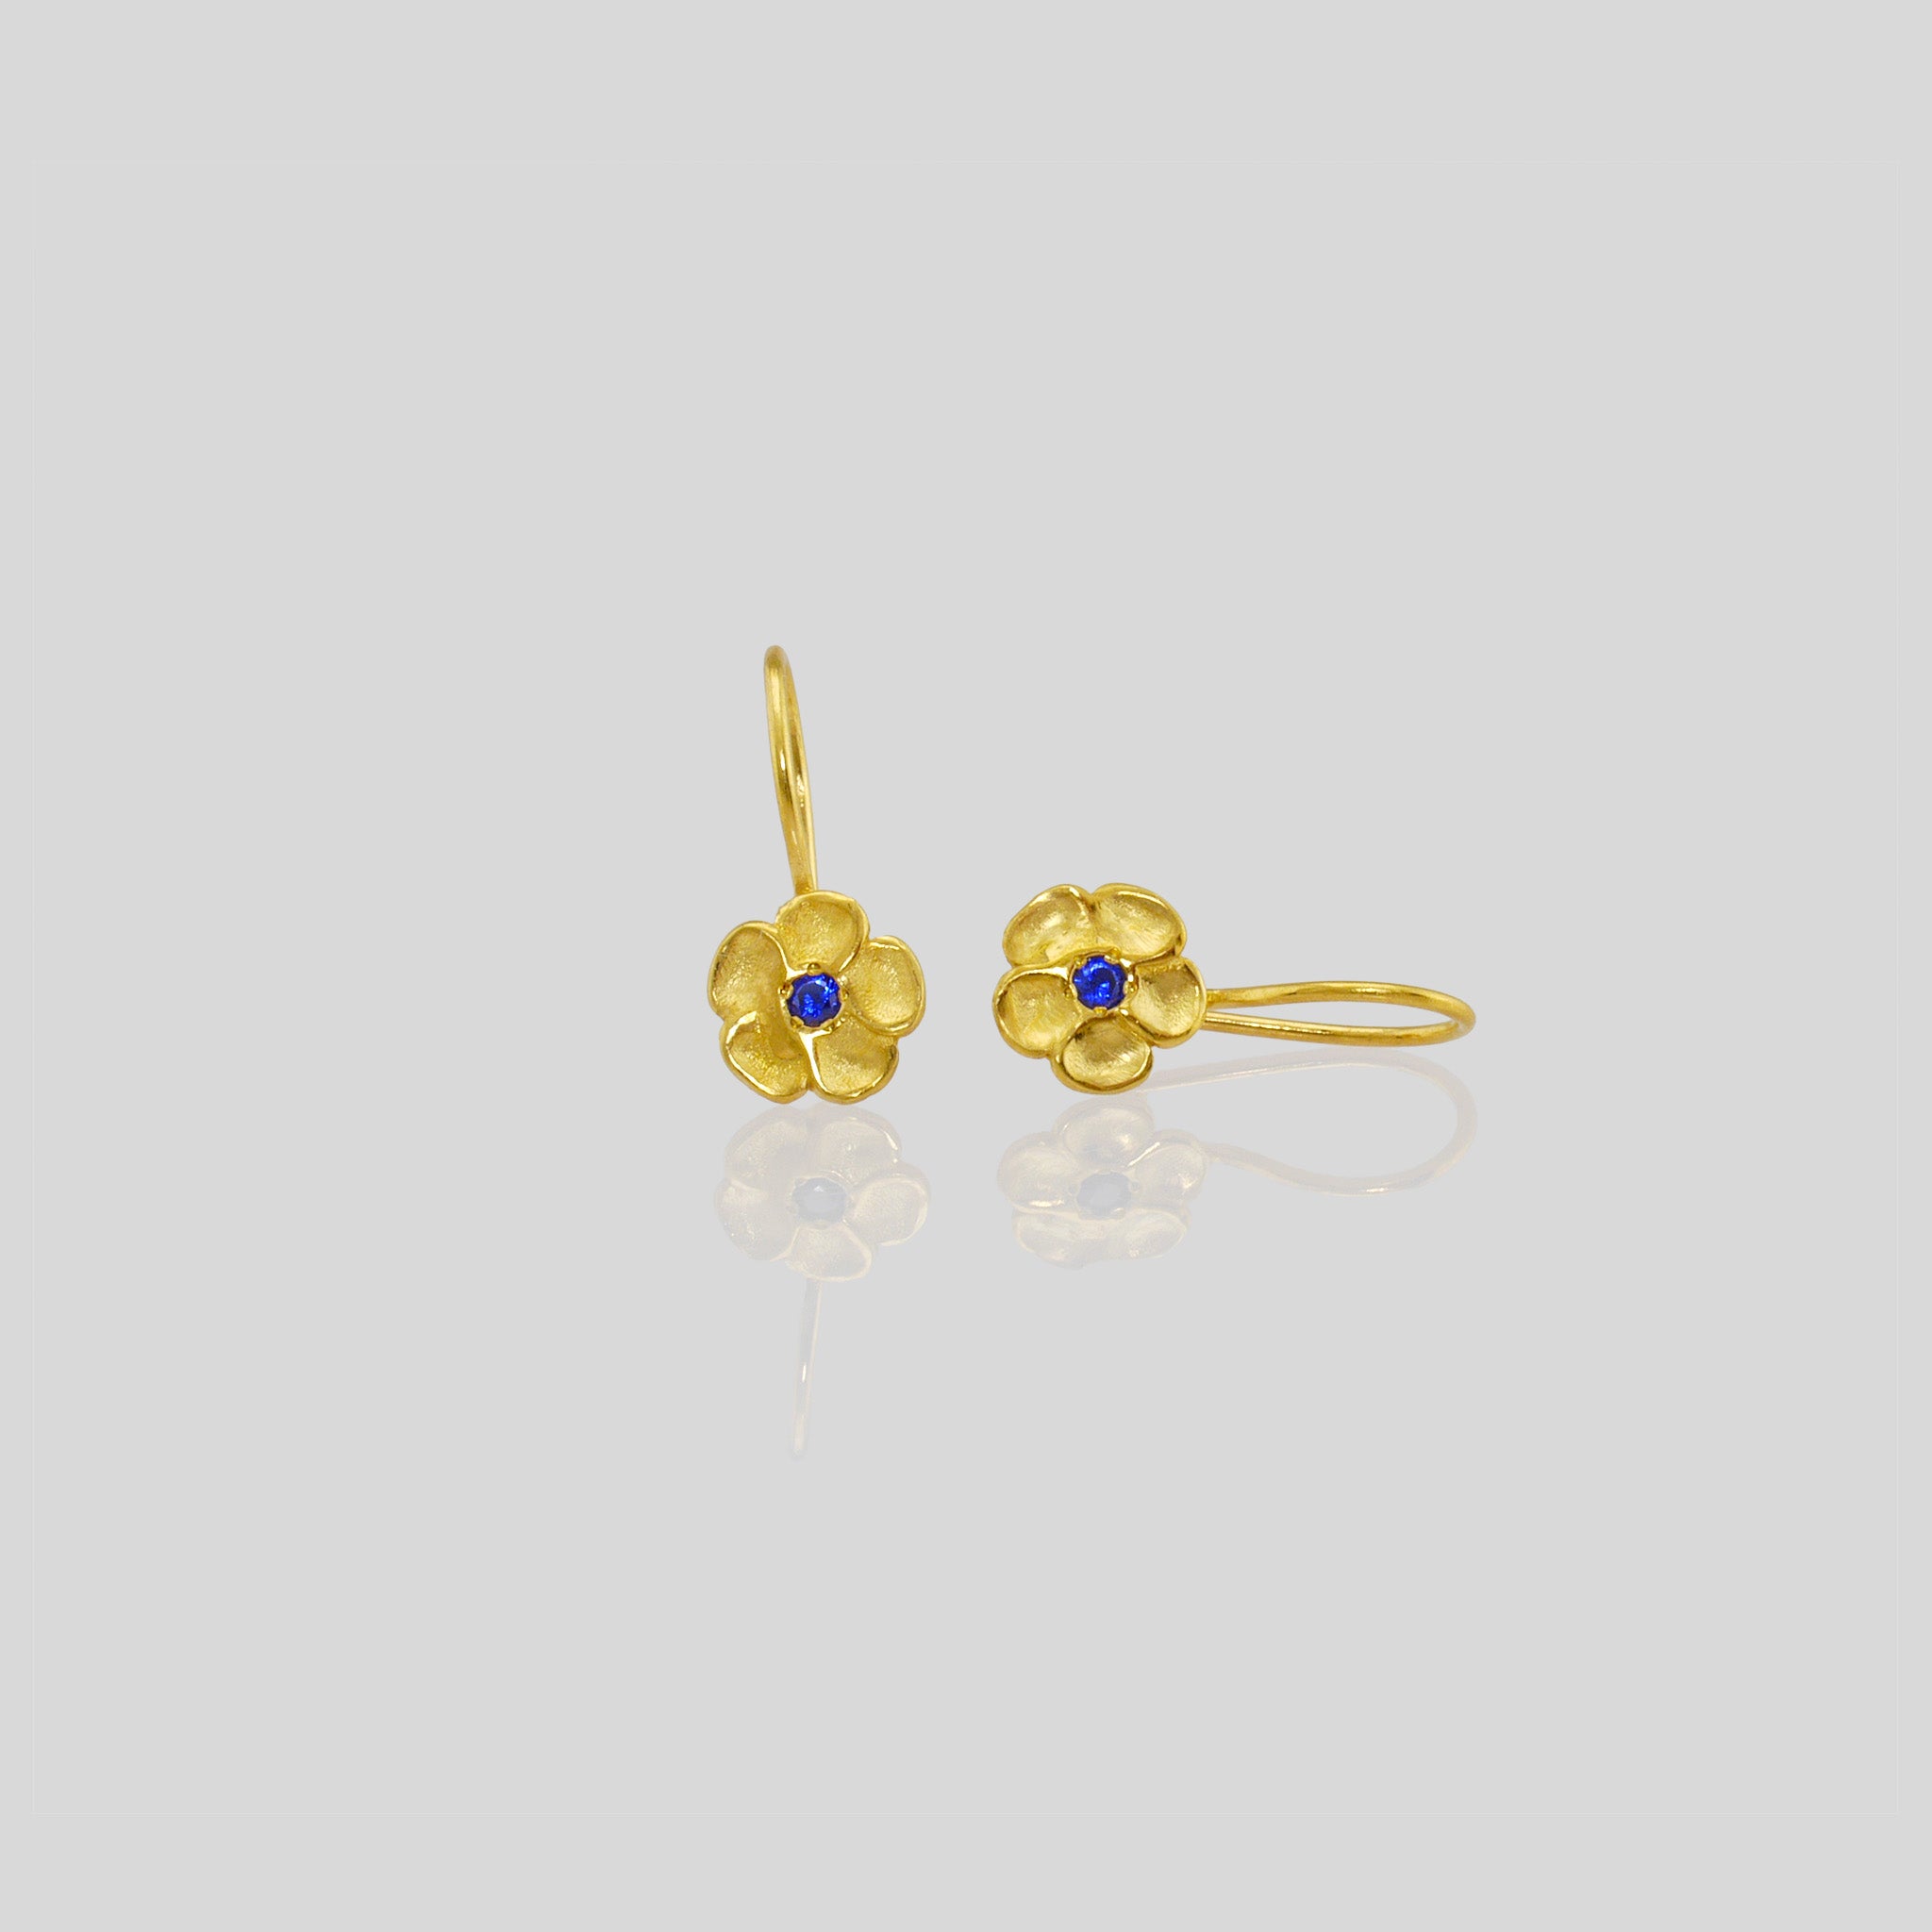 Delicate yellow gold flower drop earrings with a sparkling Sapphire center. Perfect for any occasion!